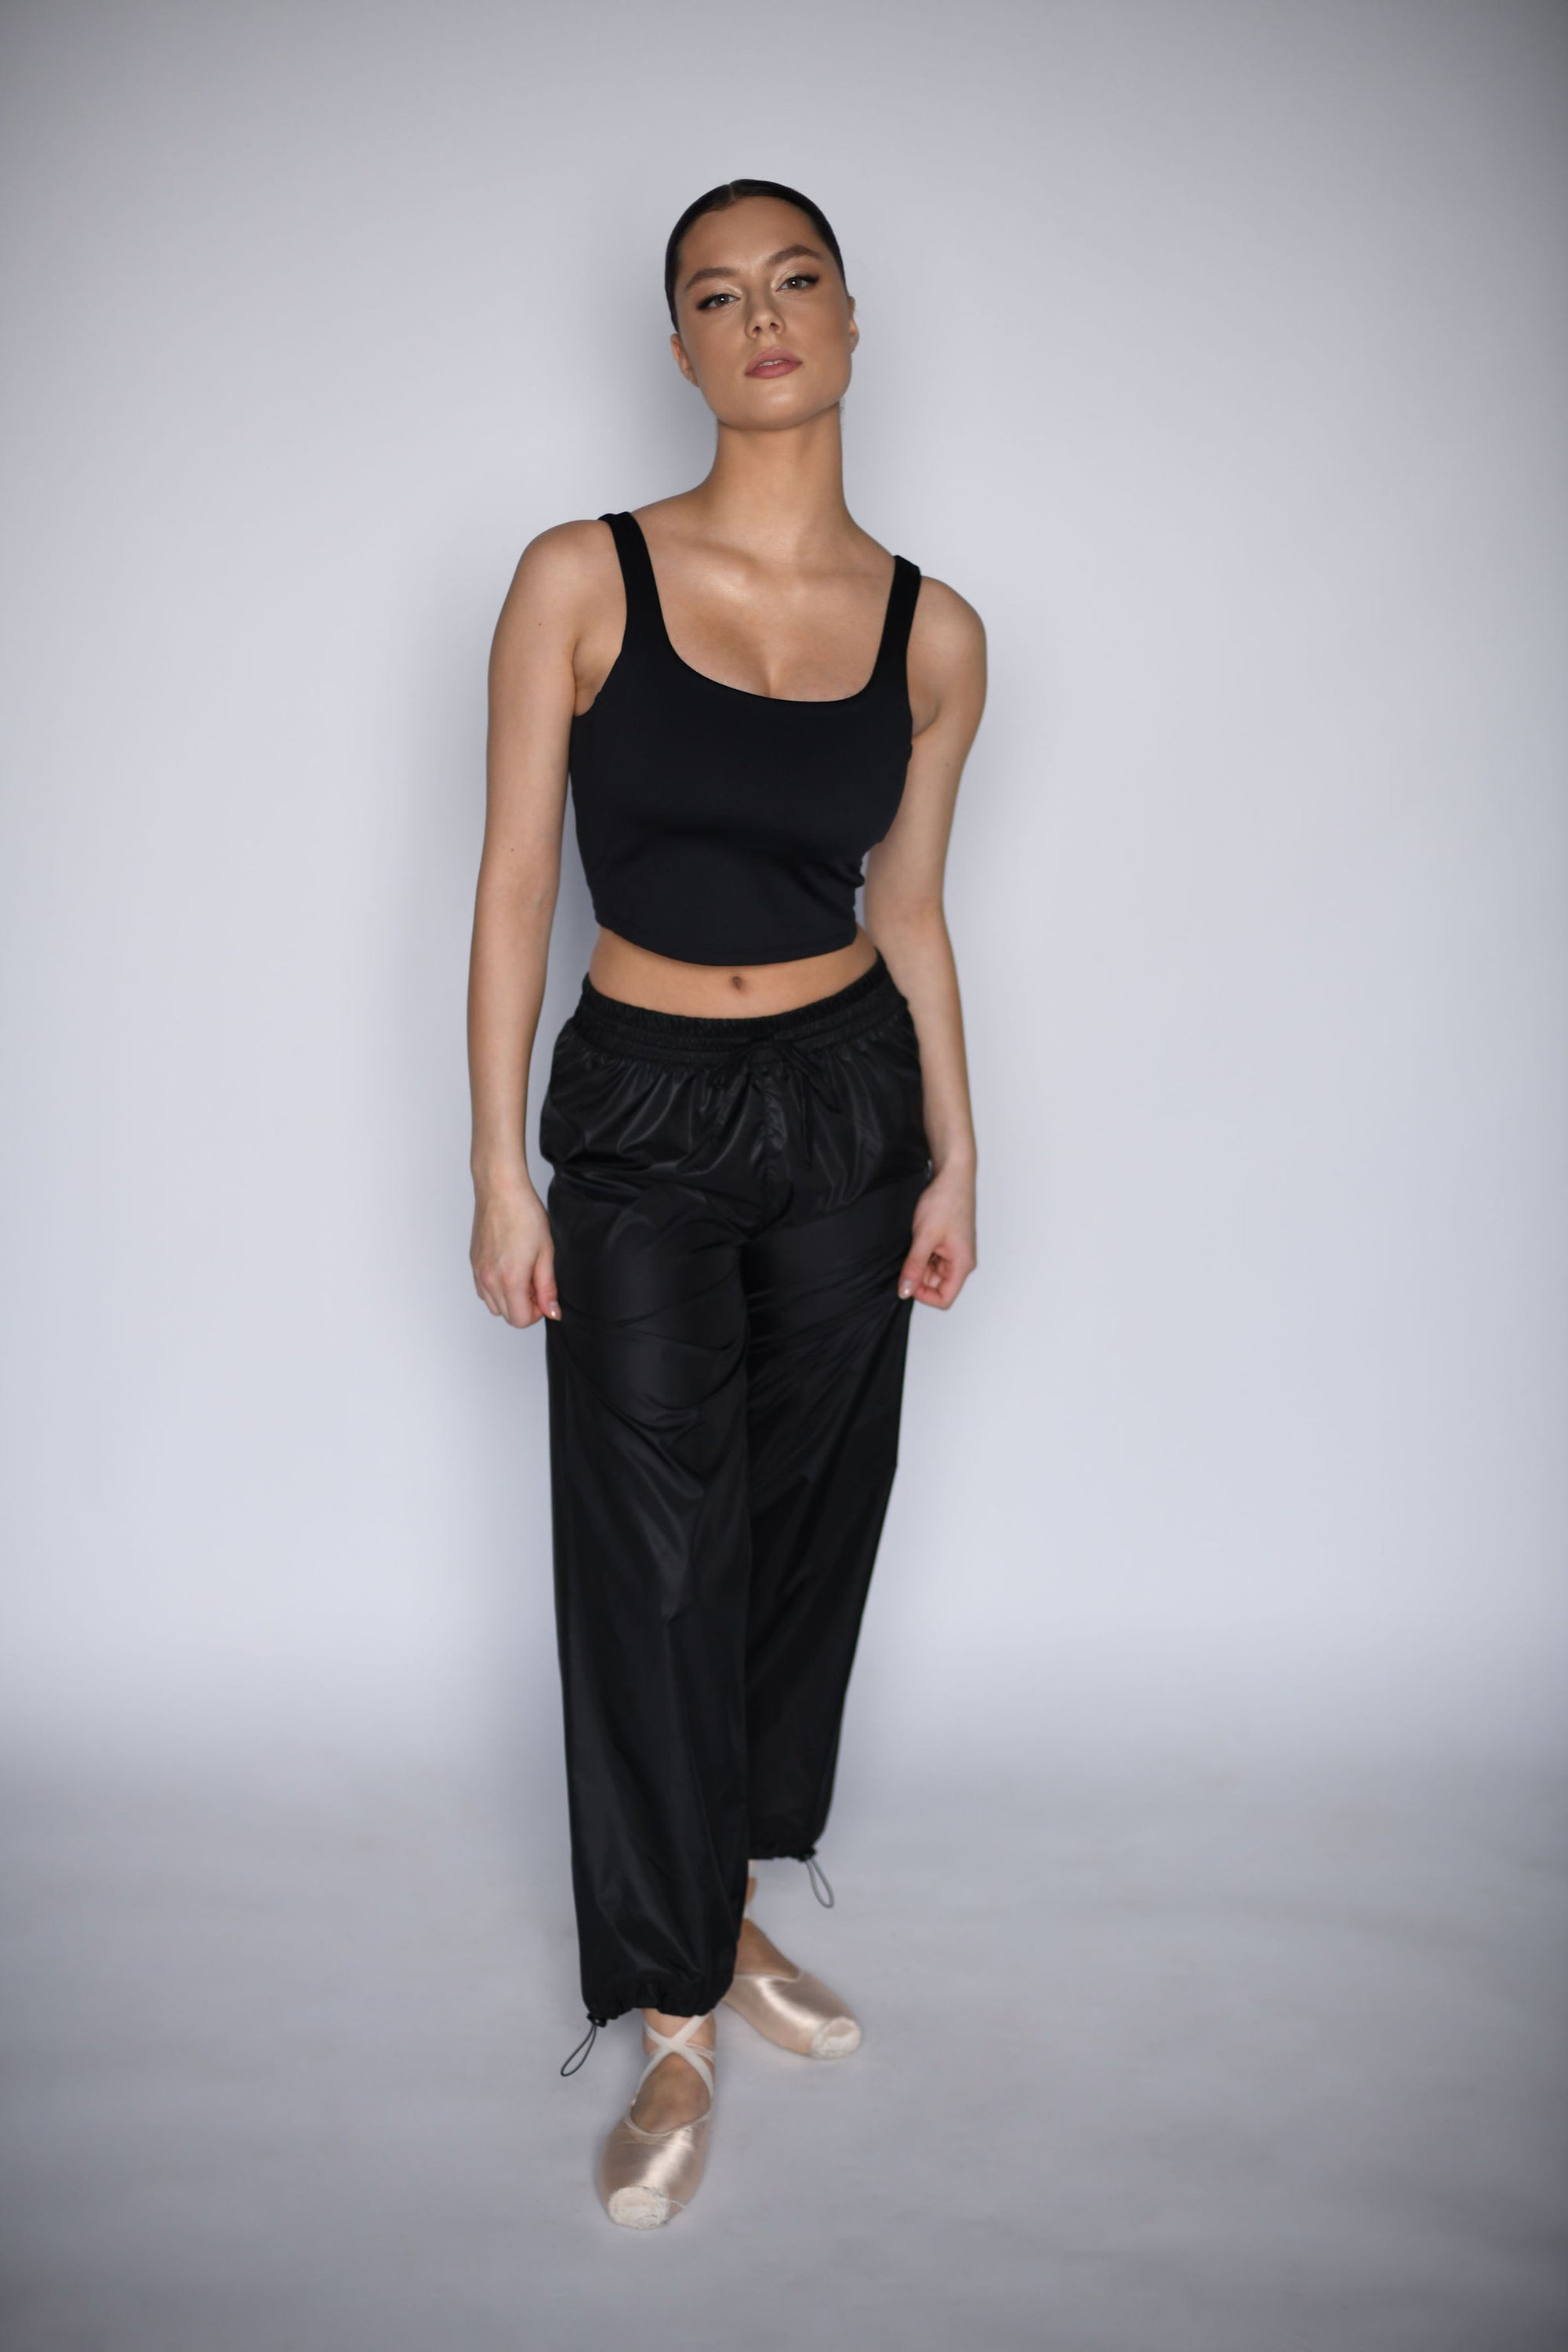 NEW URBAN SWAN COLLECTION S/S 23 | Black pearl pants